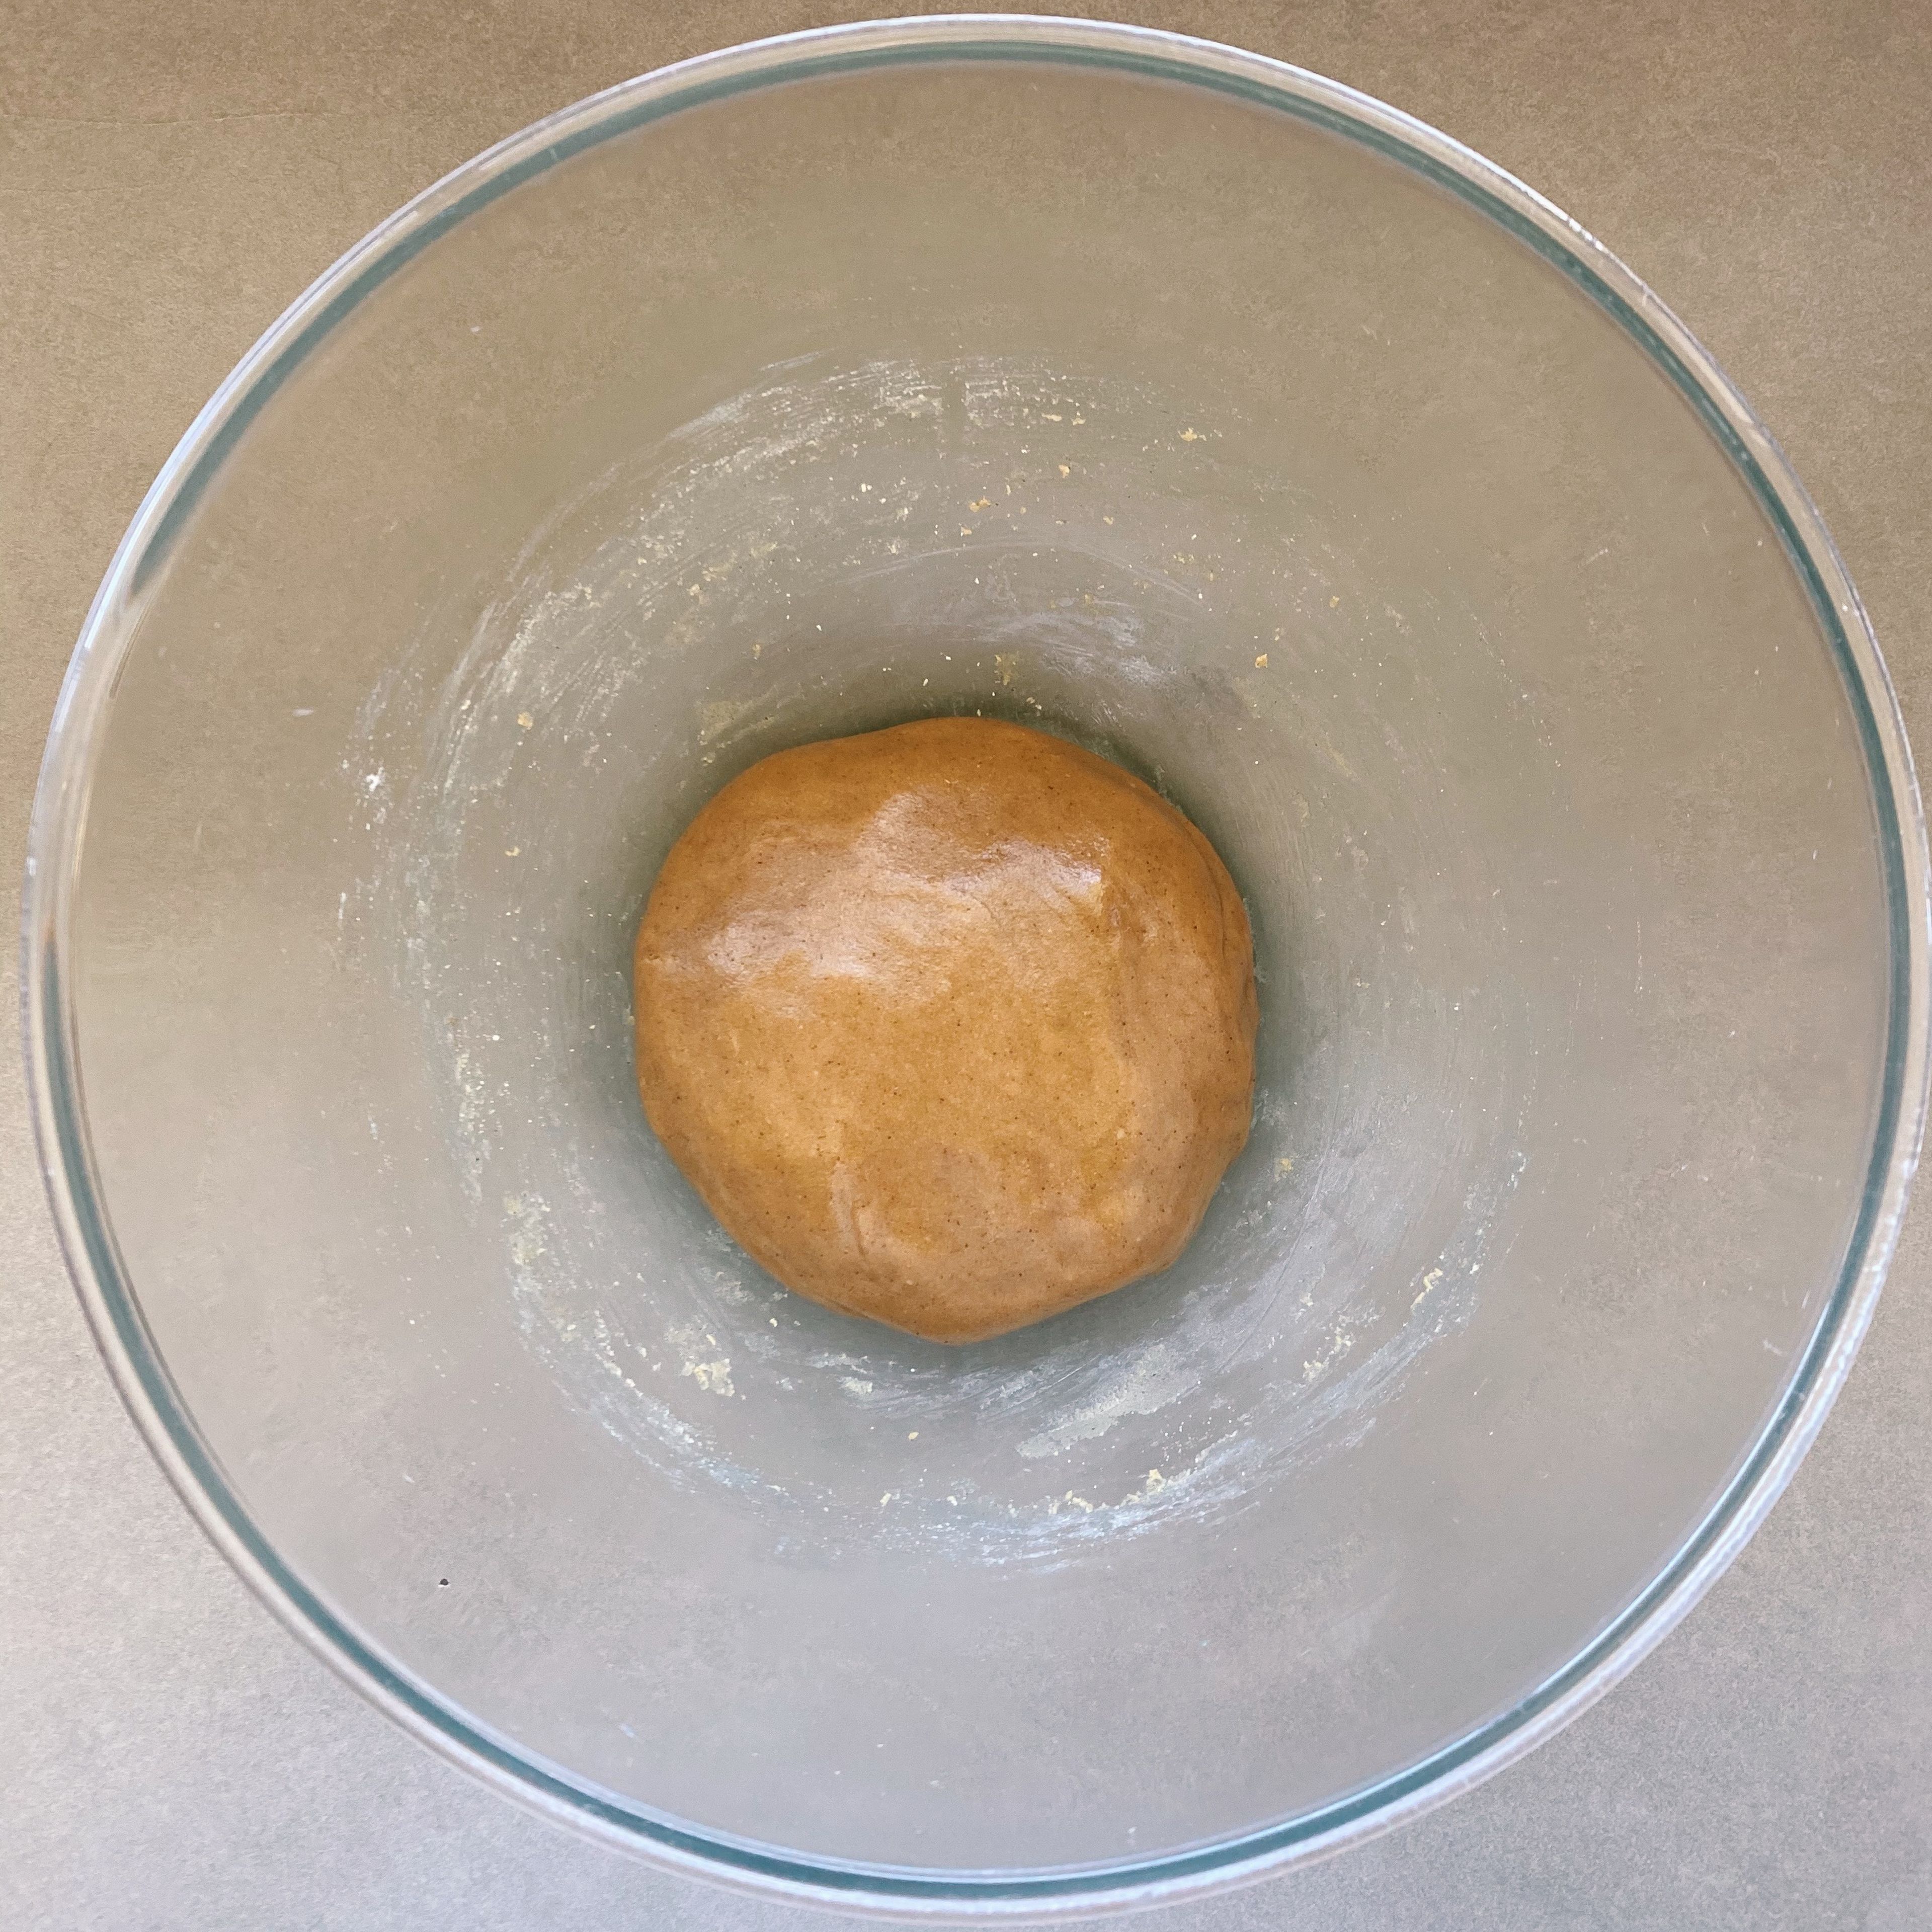 Transfer the butter mixture to a large bowl and beat for 2-3 minutes. Beat in the flour mixture in small increments, until well combined. Mould into a dough with hands.